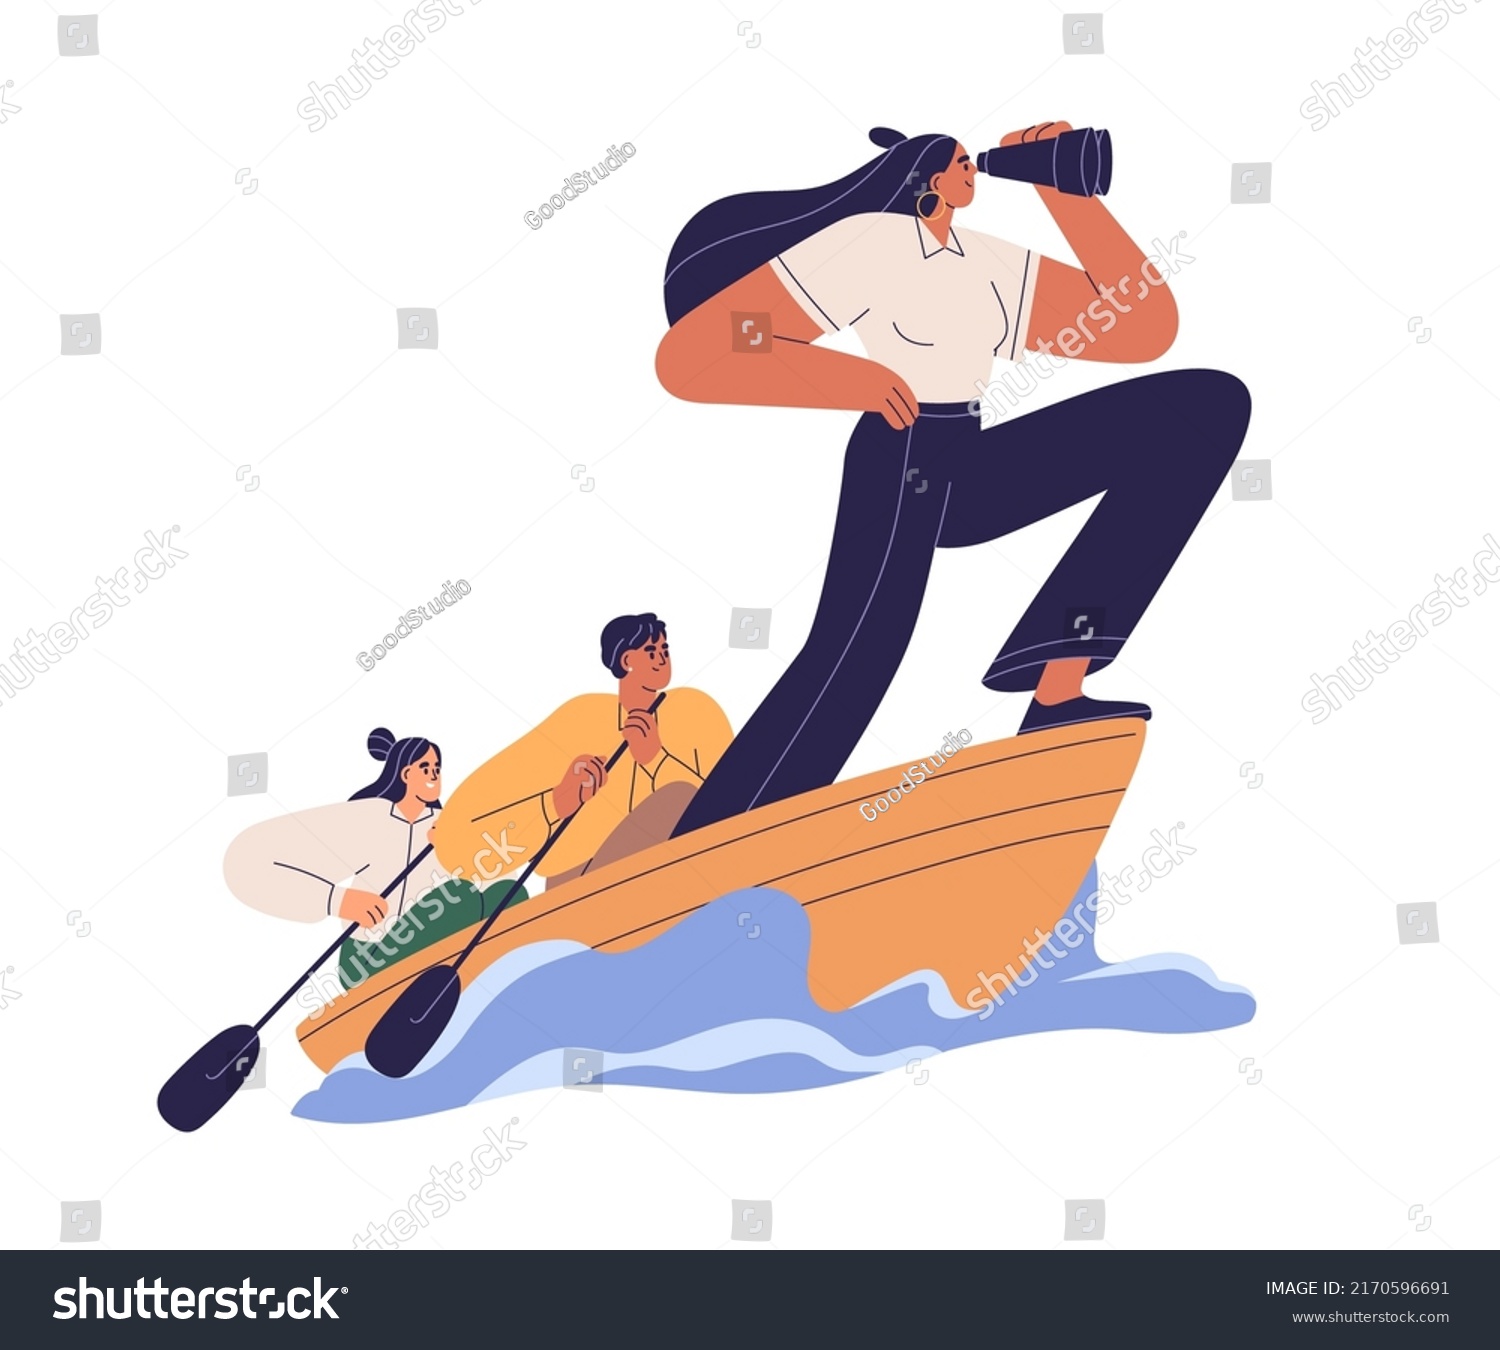 Business leader searching for new horizons, opportunities, leading boat team to goal. Leadership, strategy, vision, mission concept. Flat graphic vector illustration isolated on white background #2170596691